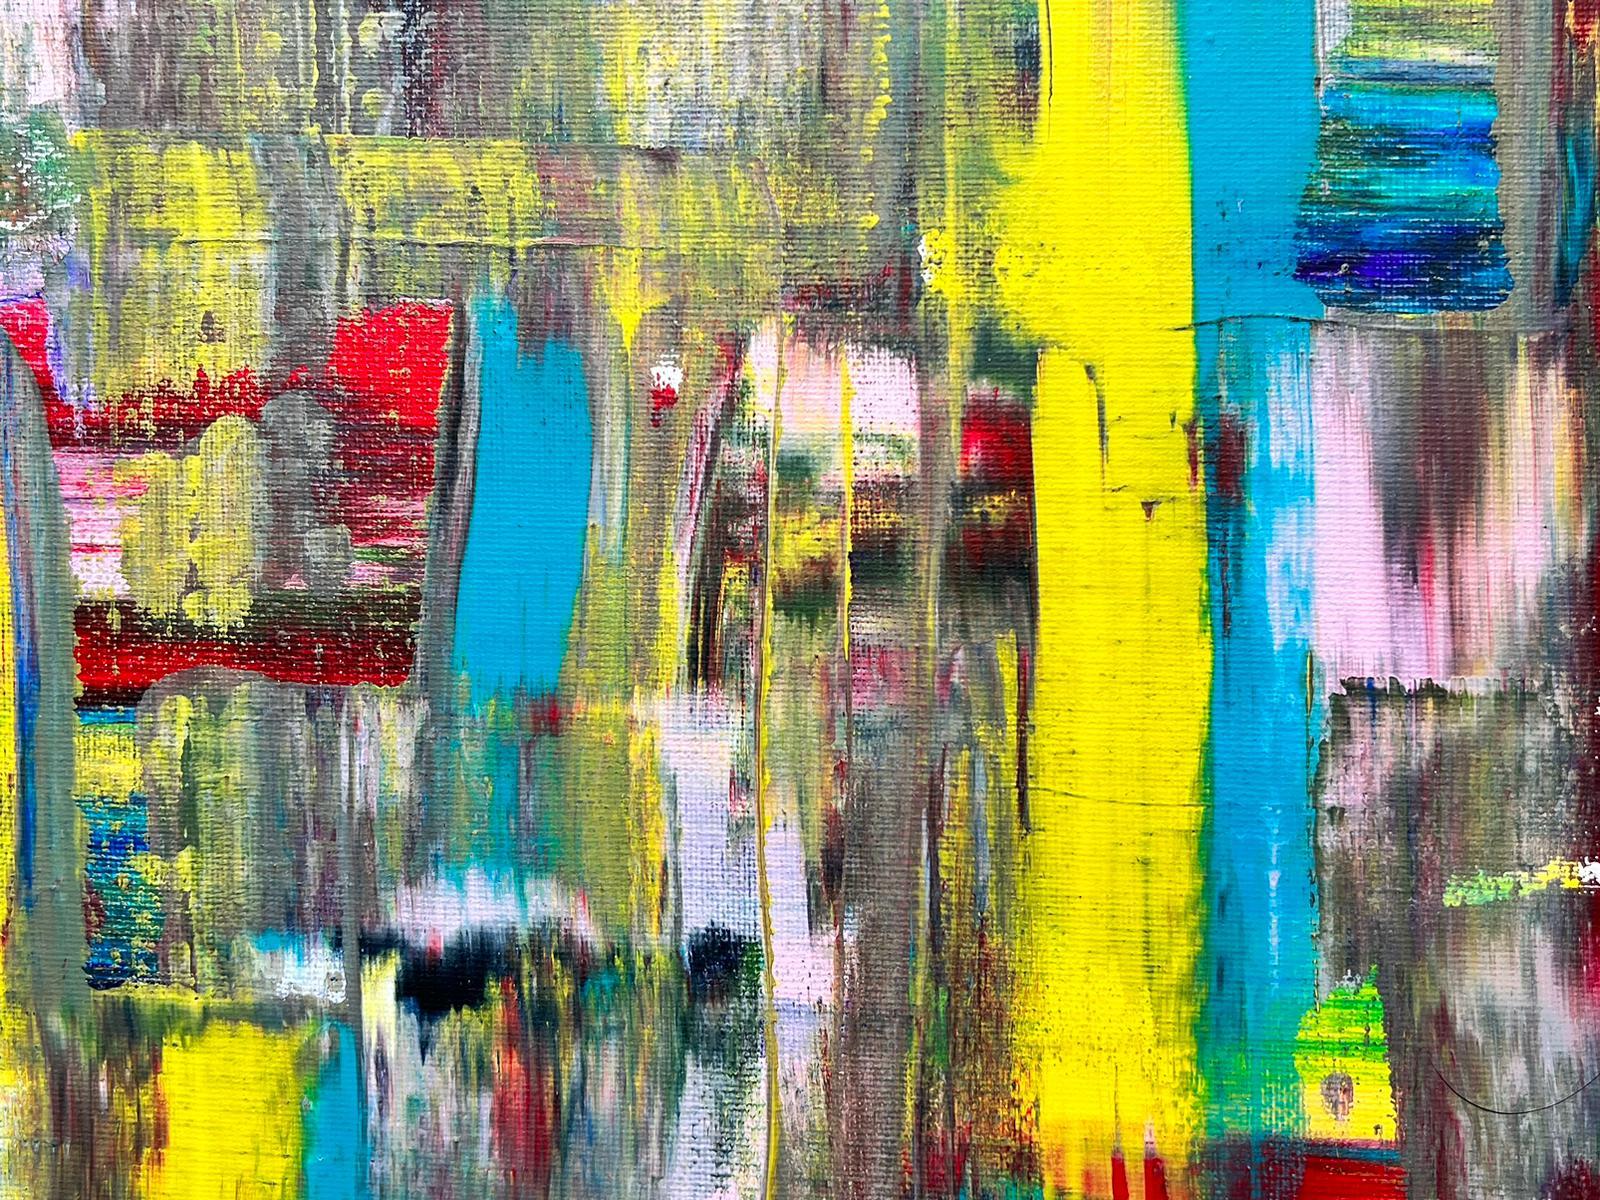 Contemporary British Abstract Of Grey Blue Yellow Multicolors - Abstract Expressionist Painting by Bolly Frost